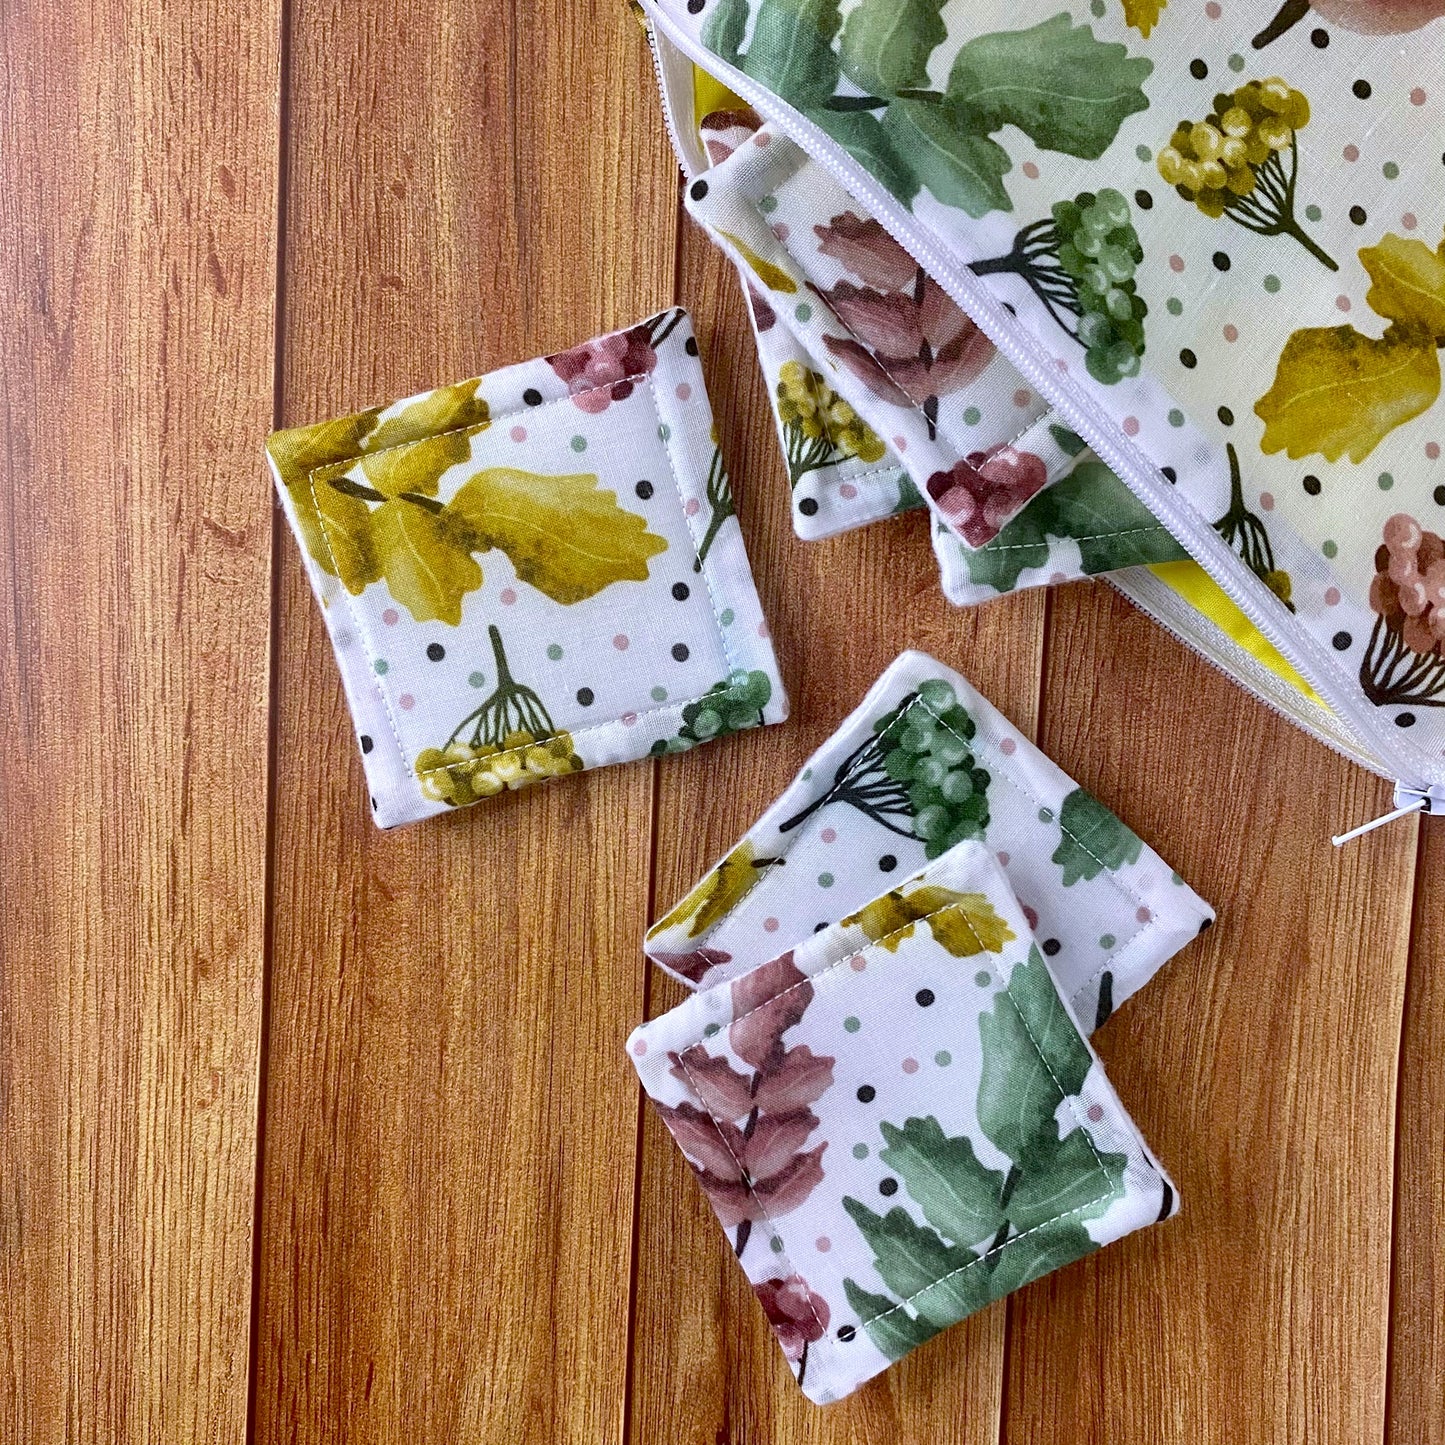 pretty foliage patterned reusable skincare pads spilling out of pouch on wooden background